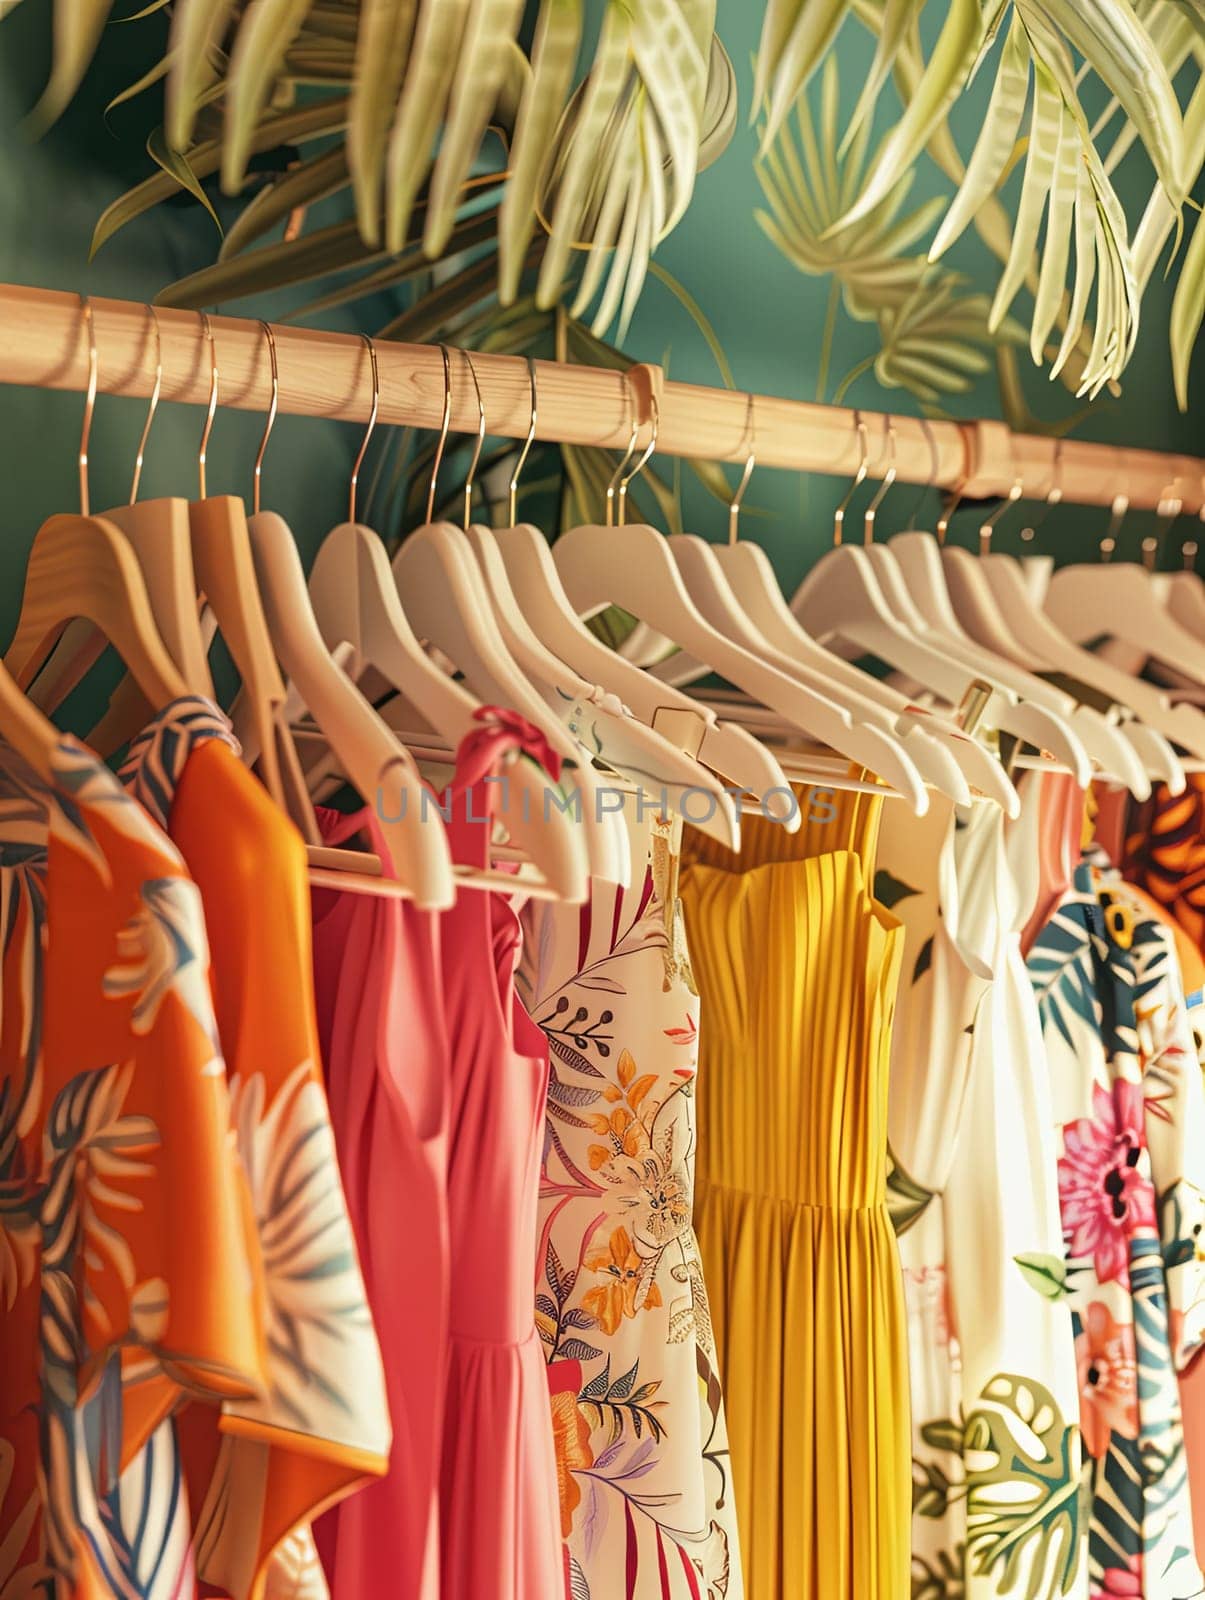 Colorful dresses and shirts hanging on racks in a summer closet, reflecting a creative concept of a designer clothing showroom.